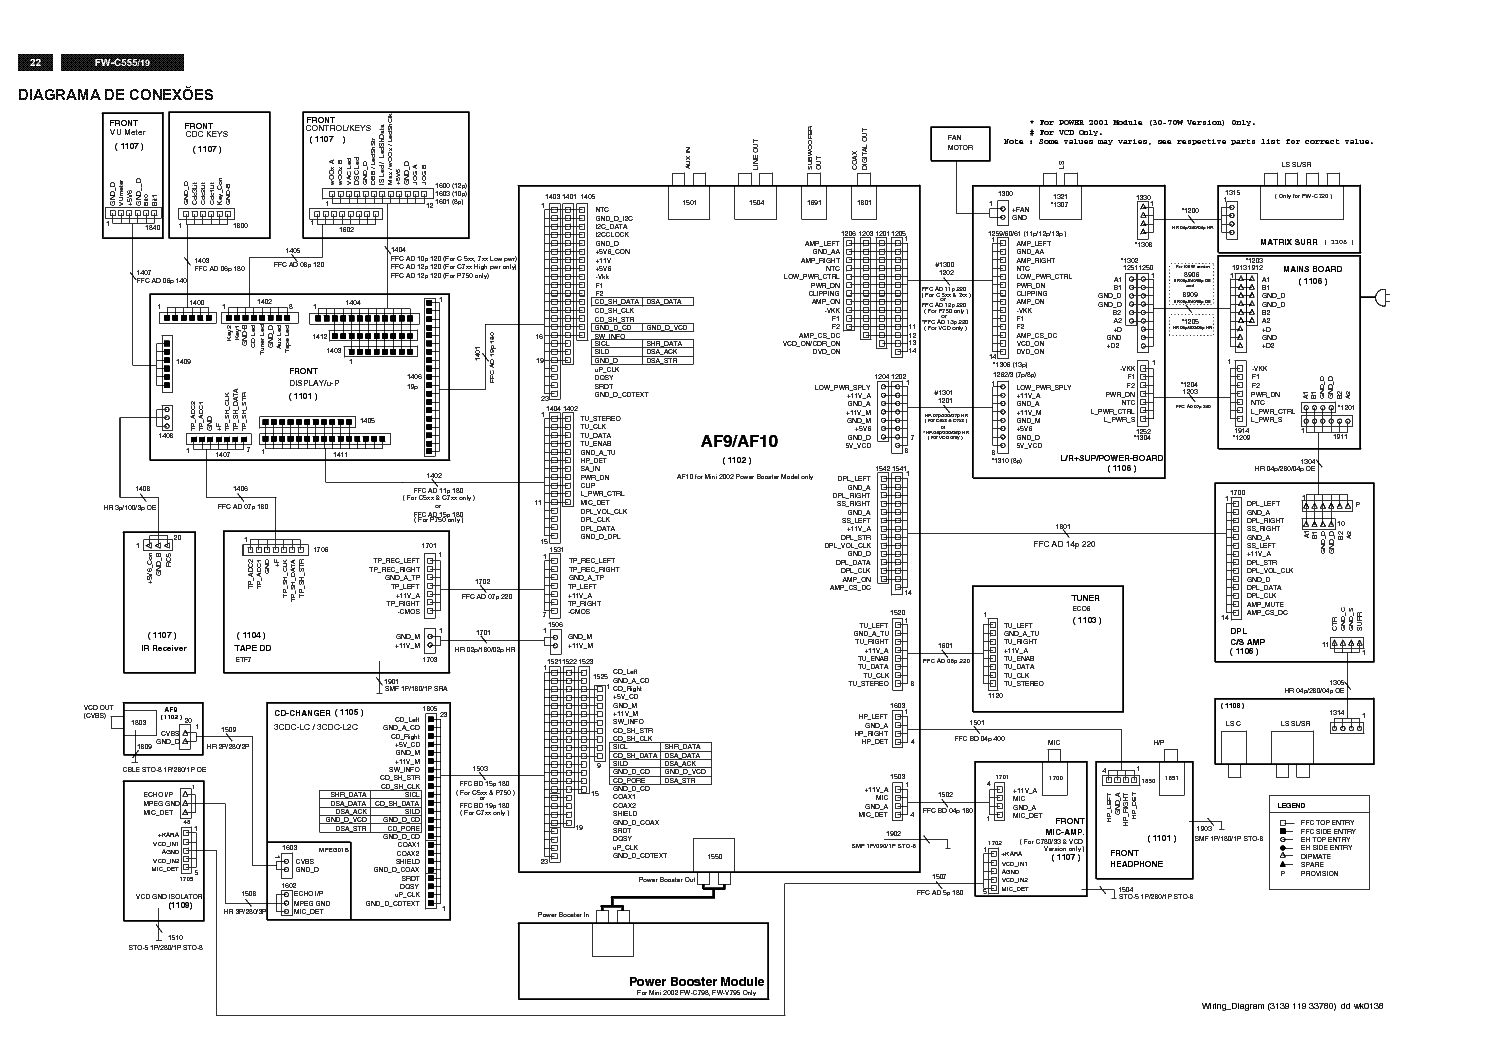 PHILIPS FW-C555 SCH service manual (2nd page)